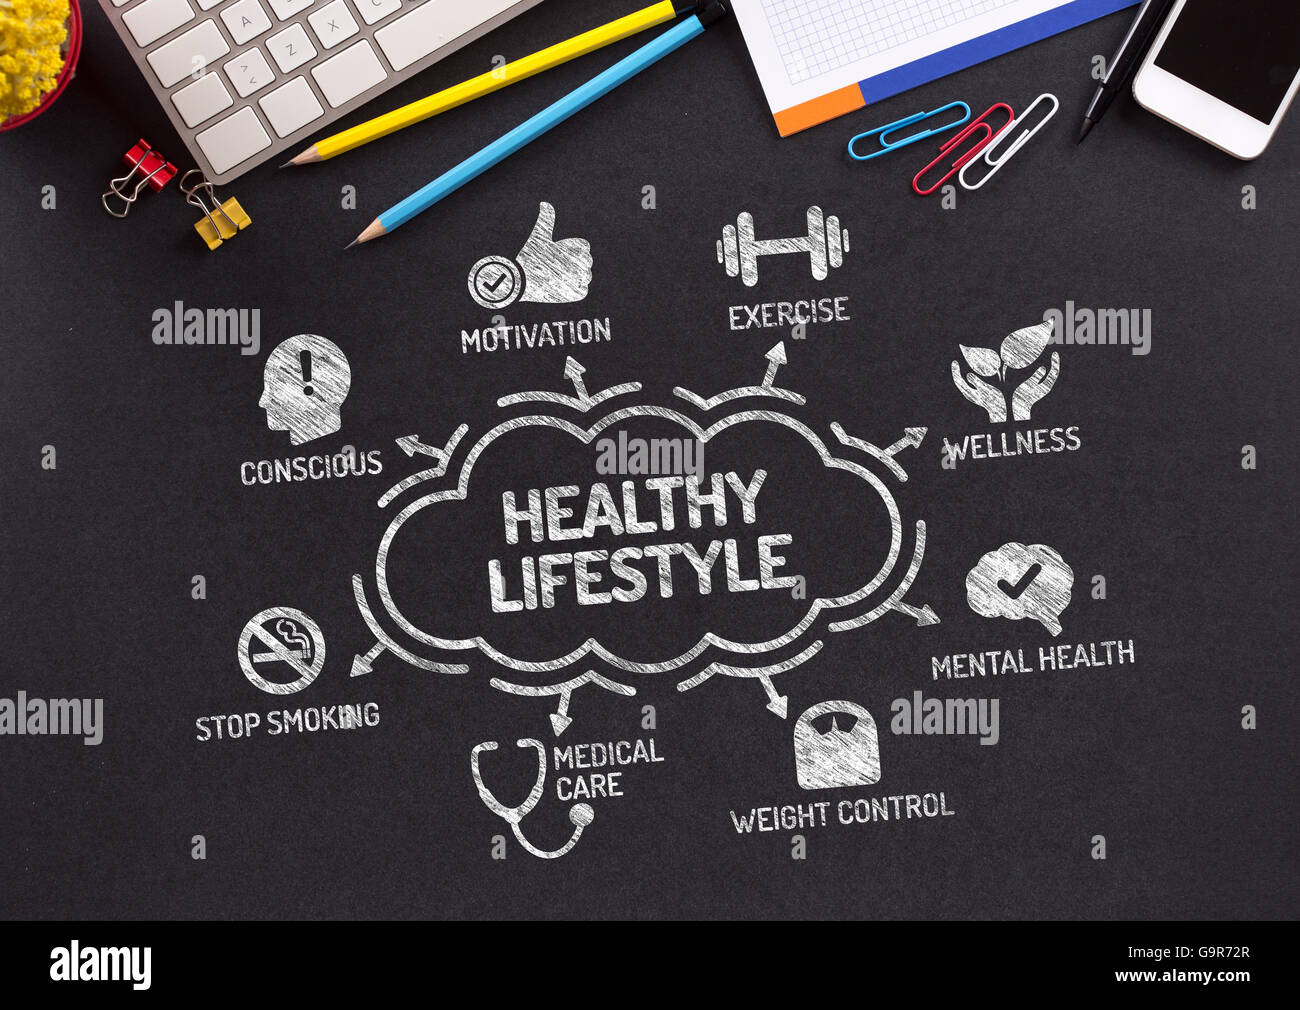 Healthy Lifestyle Chart with keywords and icons on blackboard Stock Photo